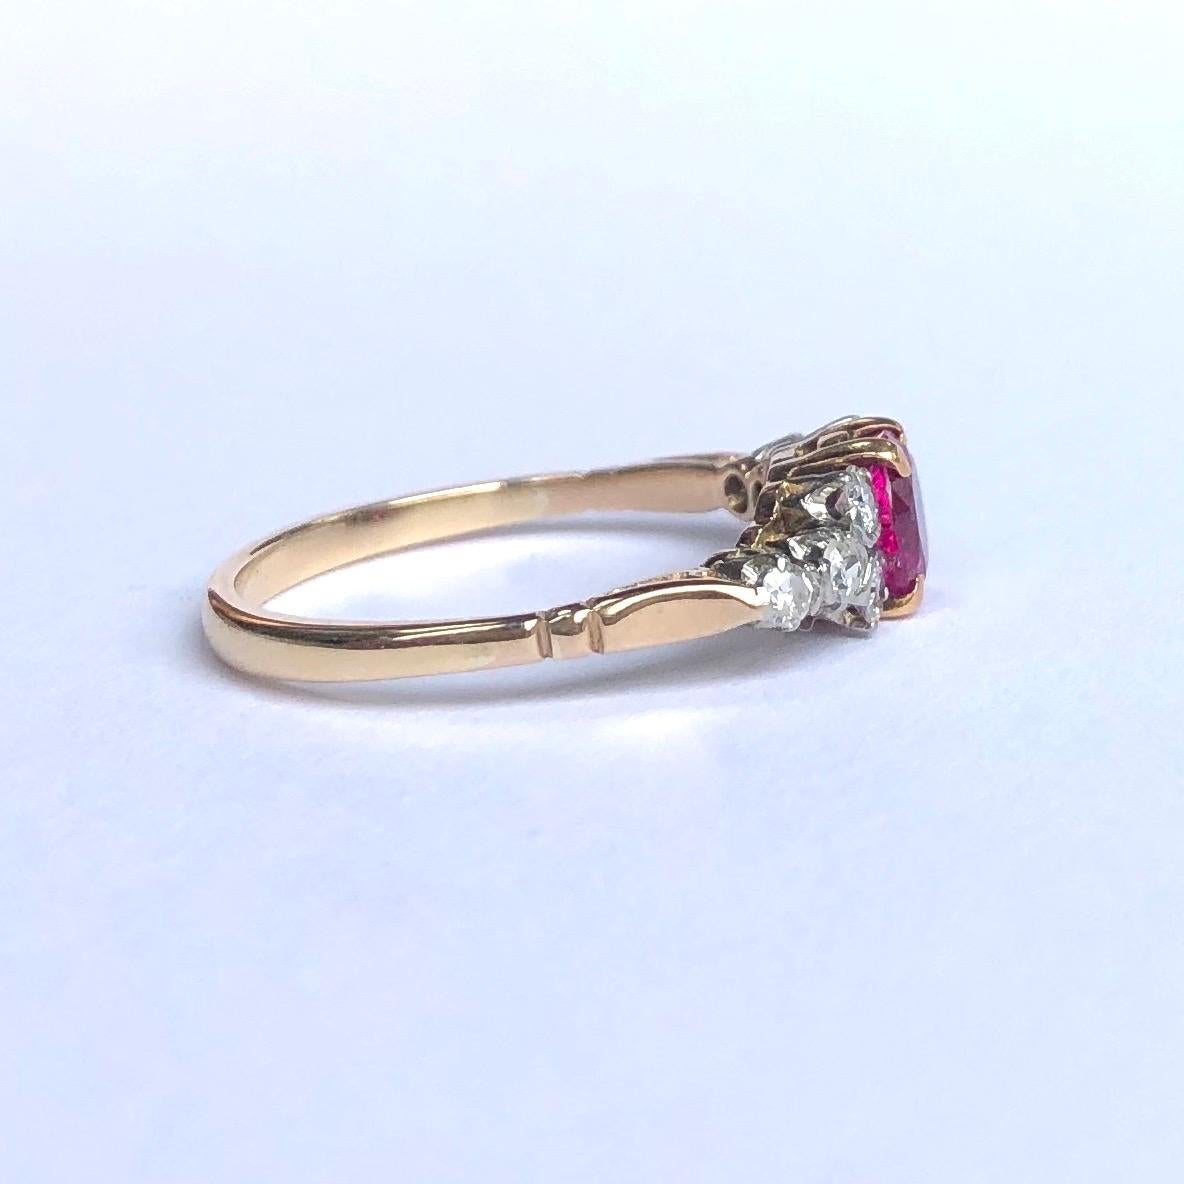 The central ruby in this ring is absolutely stunning. It is bright pink in colour and measures approx 60pts and either side of it are four smaller diamonds each measuring 5pts each. The stones are set in platinum and the rest of the ring is modelled